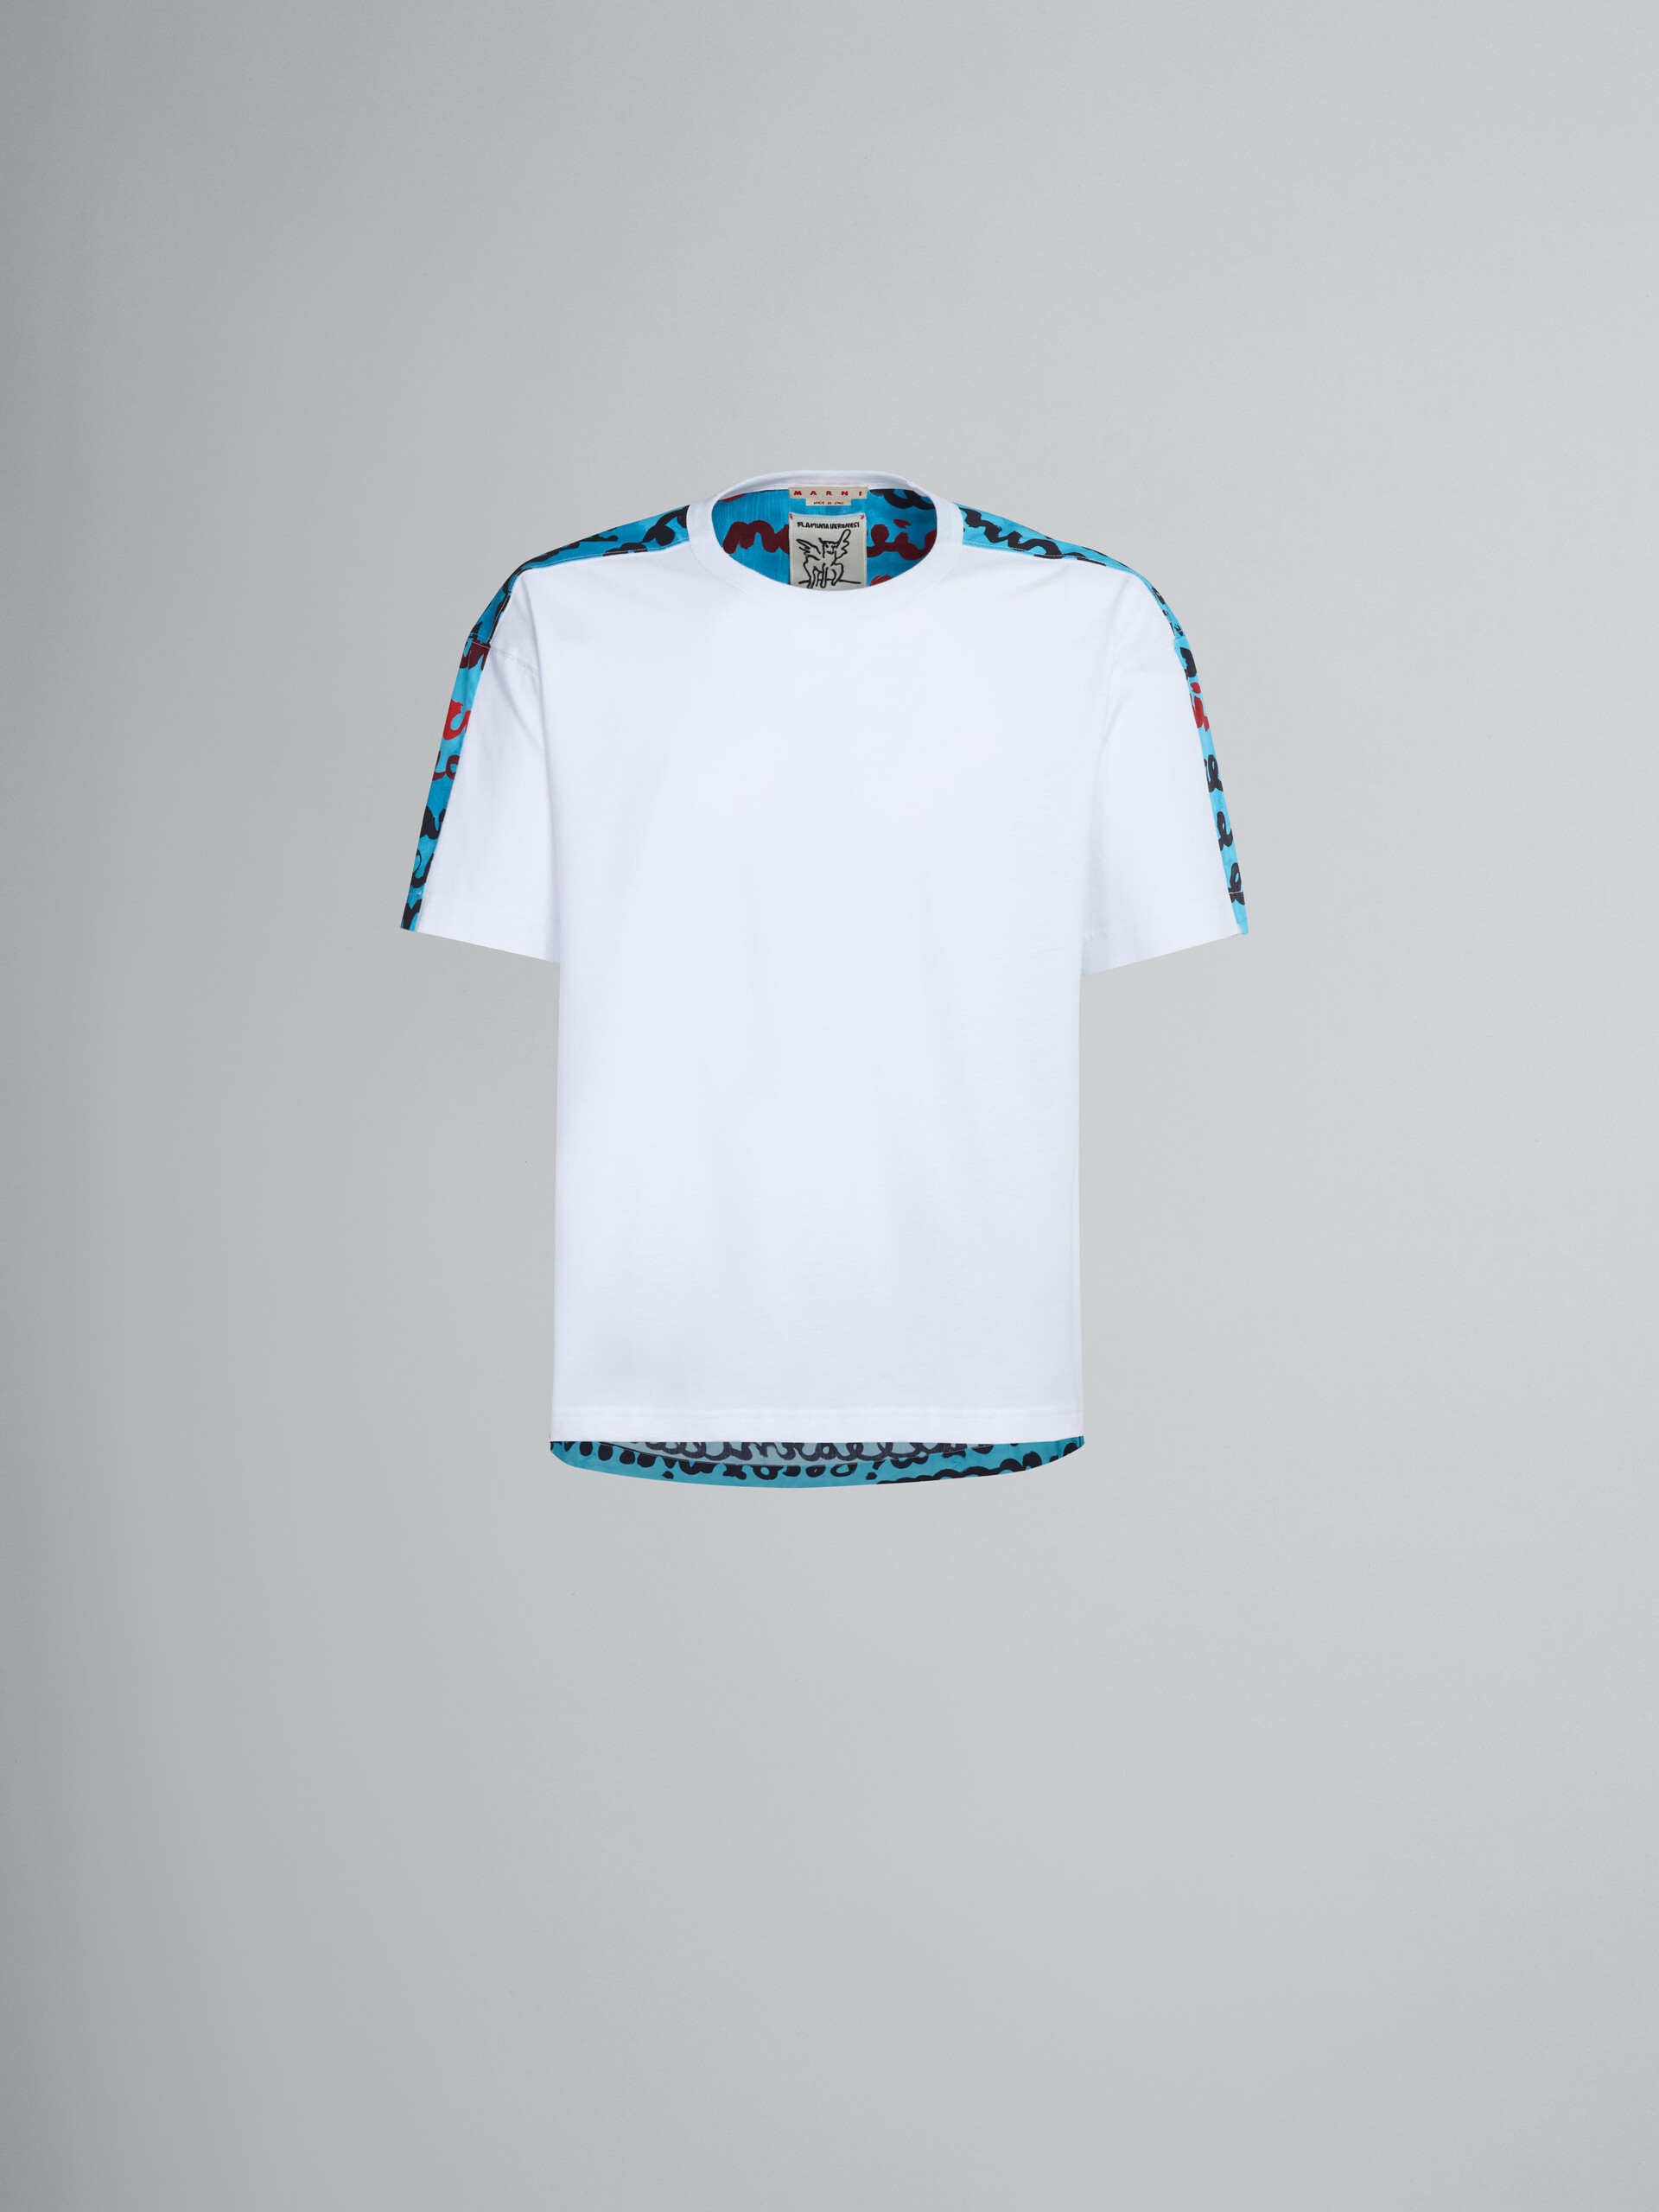 Bio cotton jersey T-shirt with contrasting back - T-shirts - Image 1